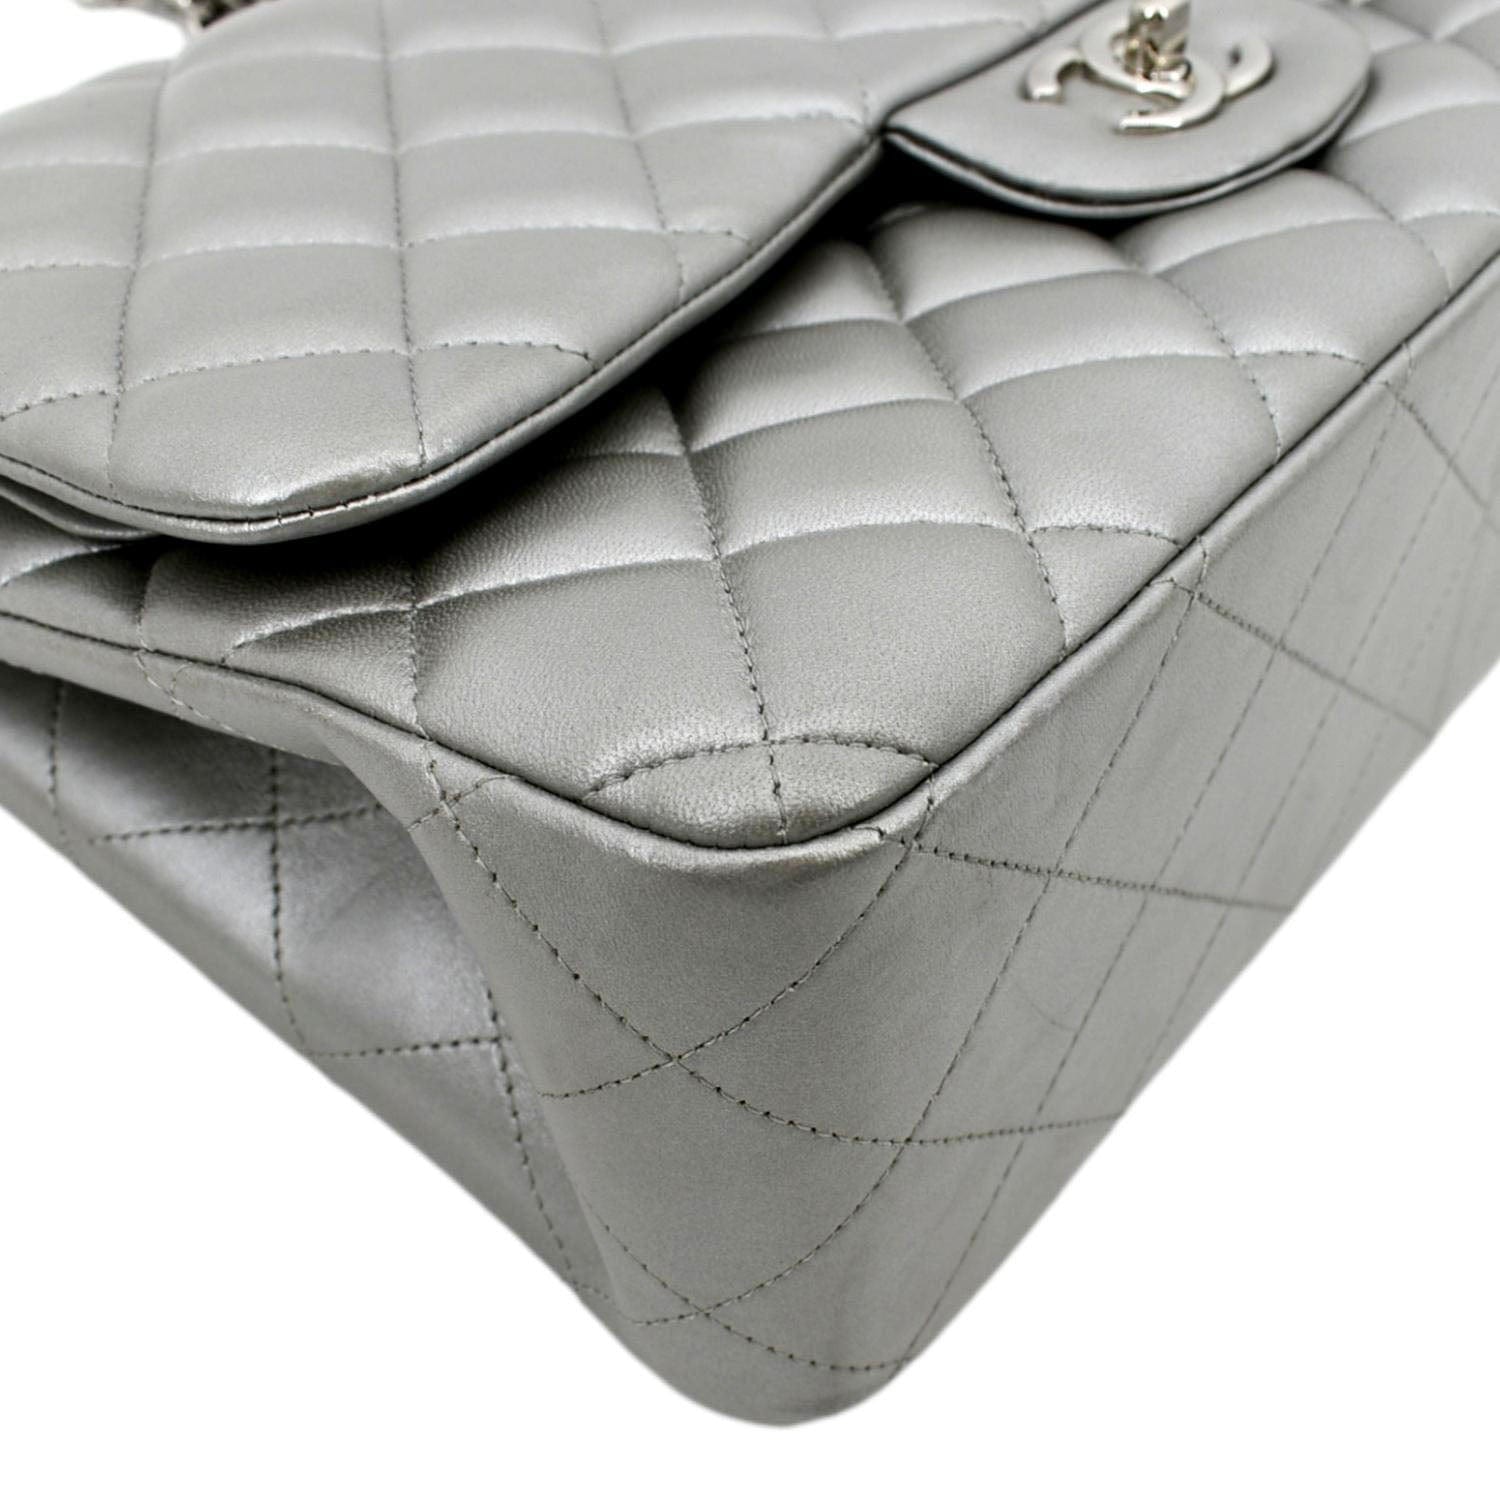 Chanel Metallic Silver Quilted Lambskin New Classic Double Flap